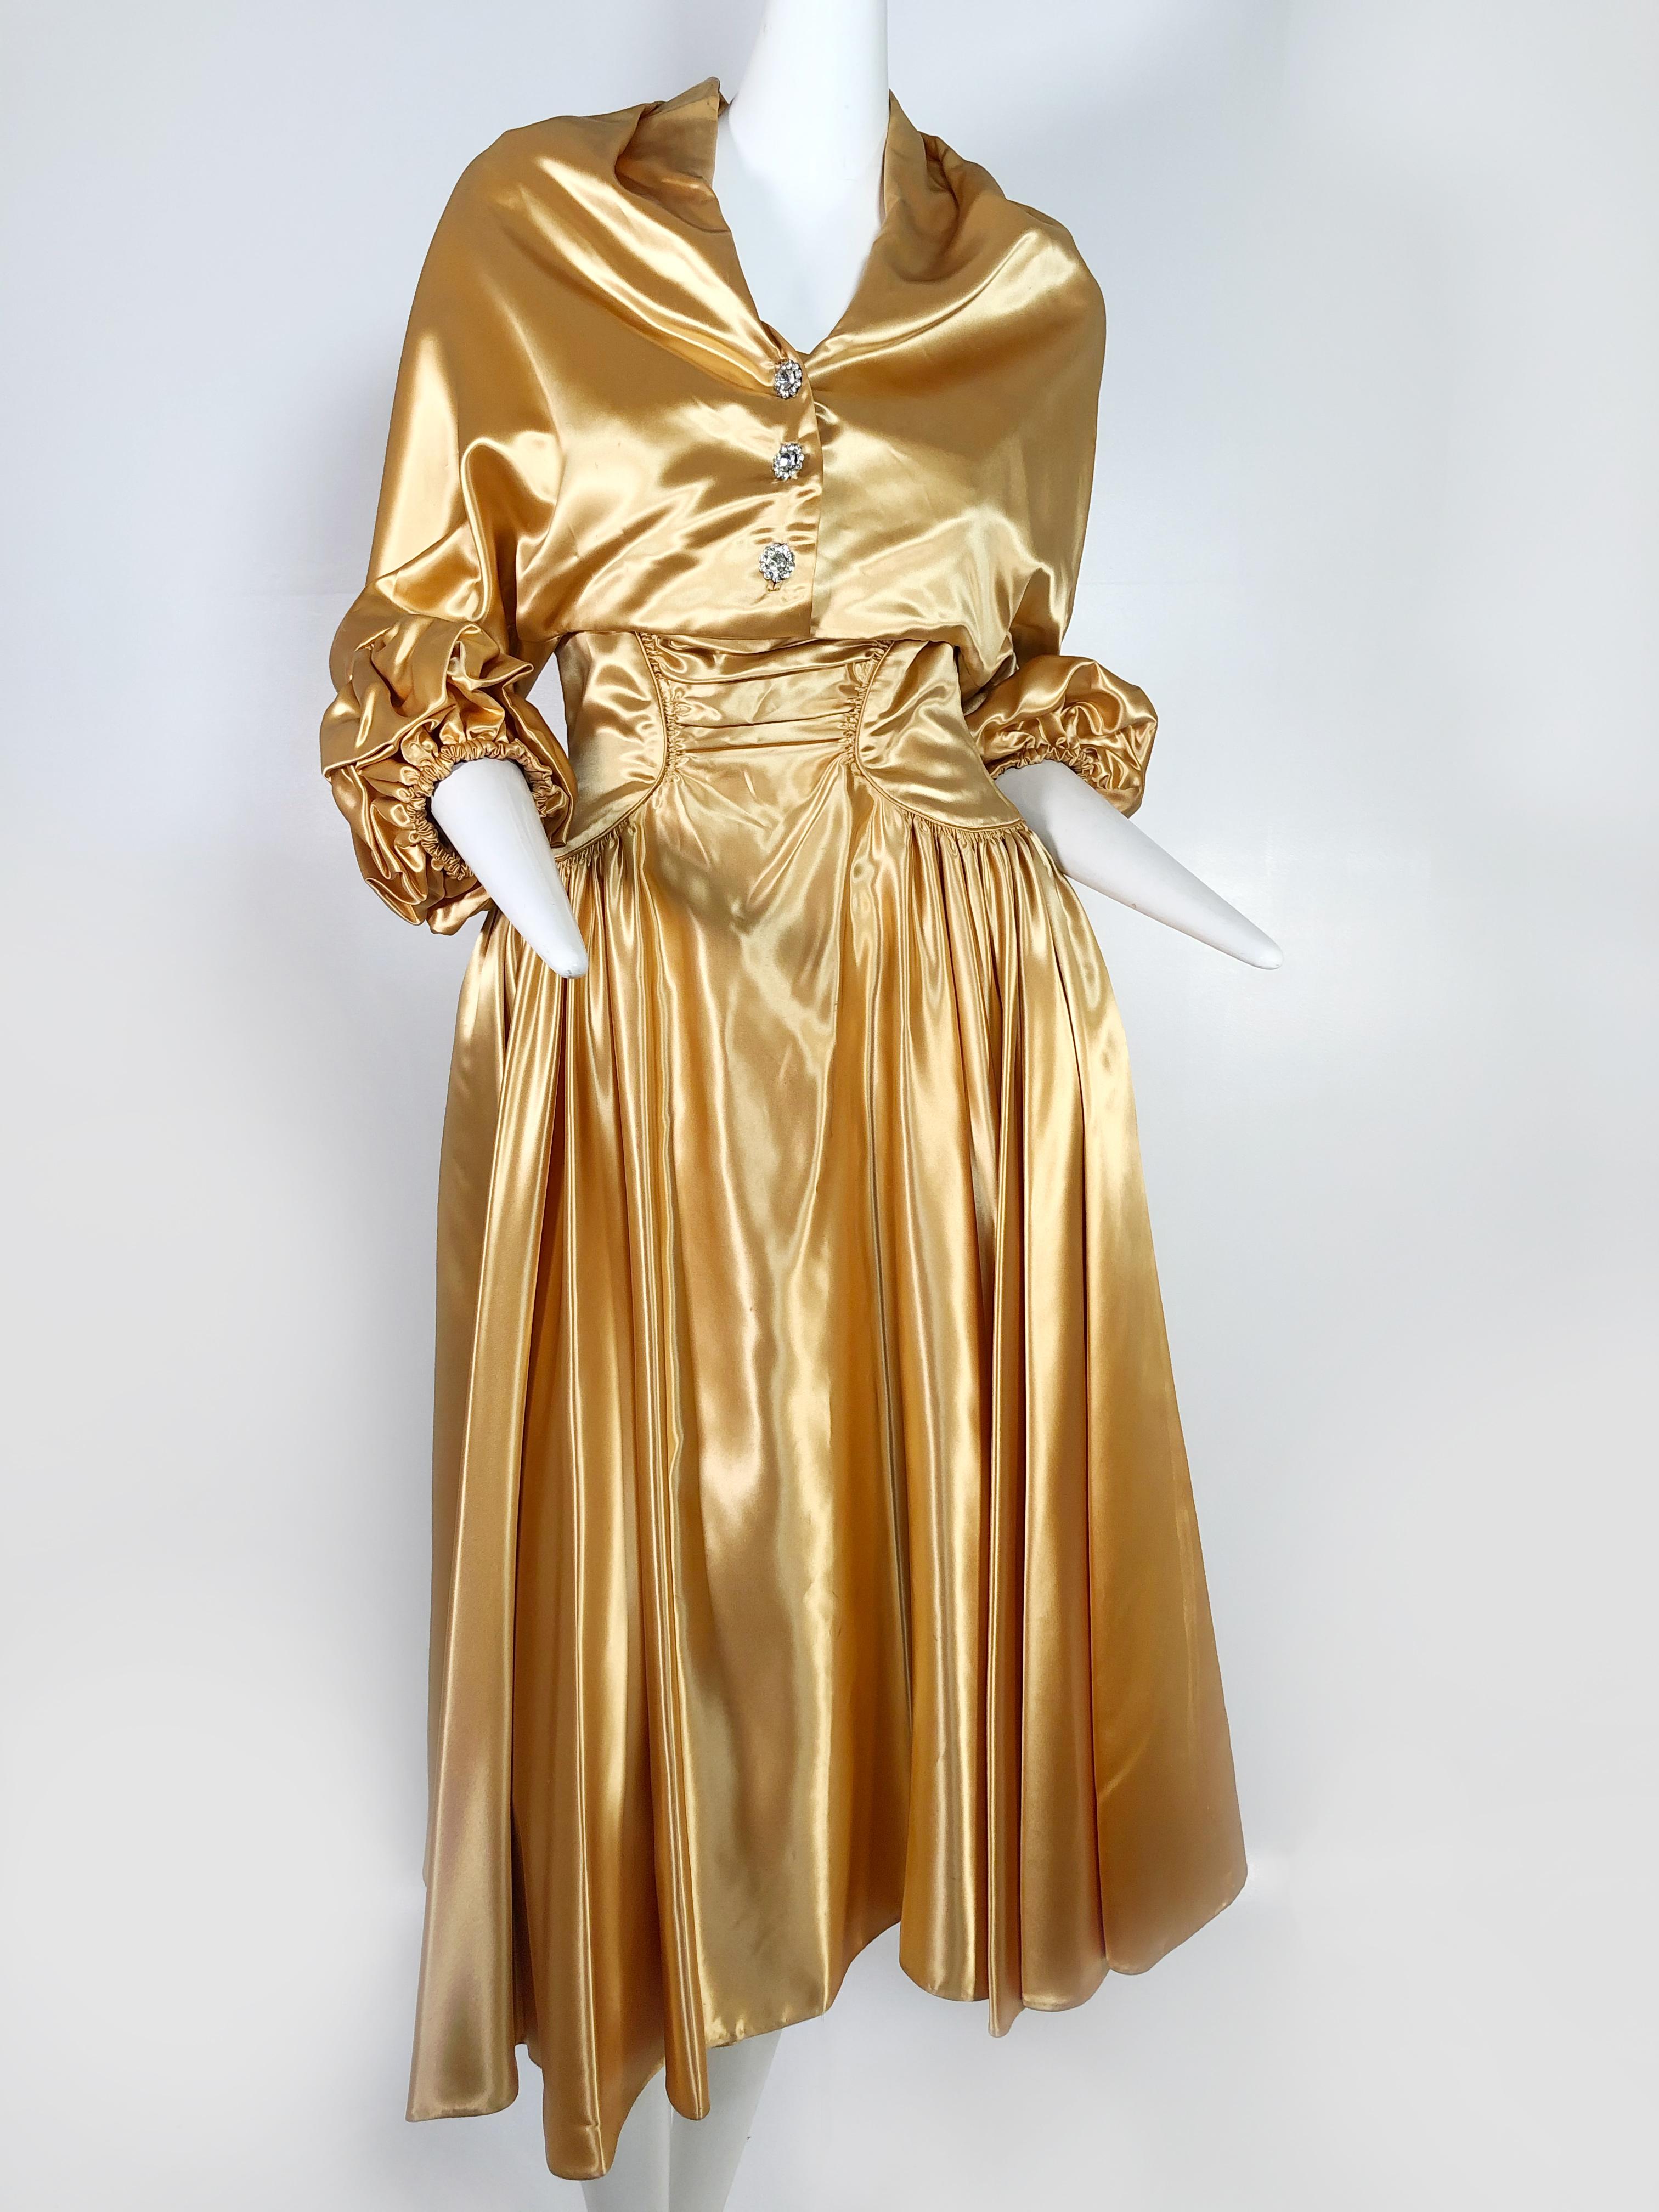 A gorgeous, unmarked as to maker, 1950s gold silk satin strapless dress and jacket ensemble:  dress features a full skirt and constructed zipper back bodice with unusual 